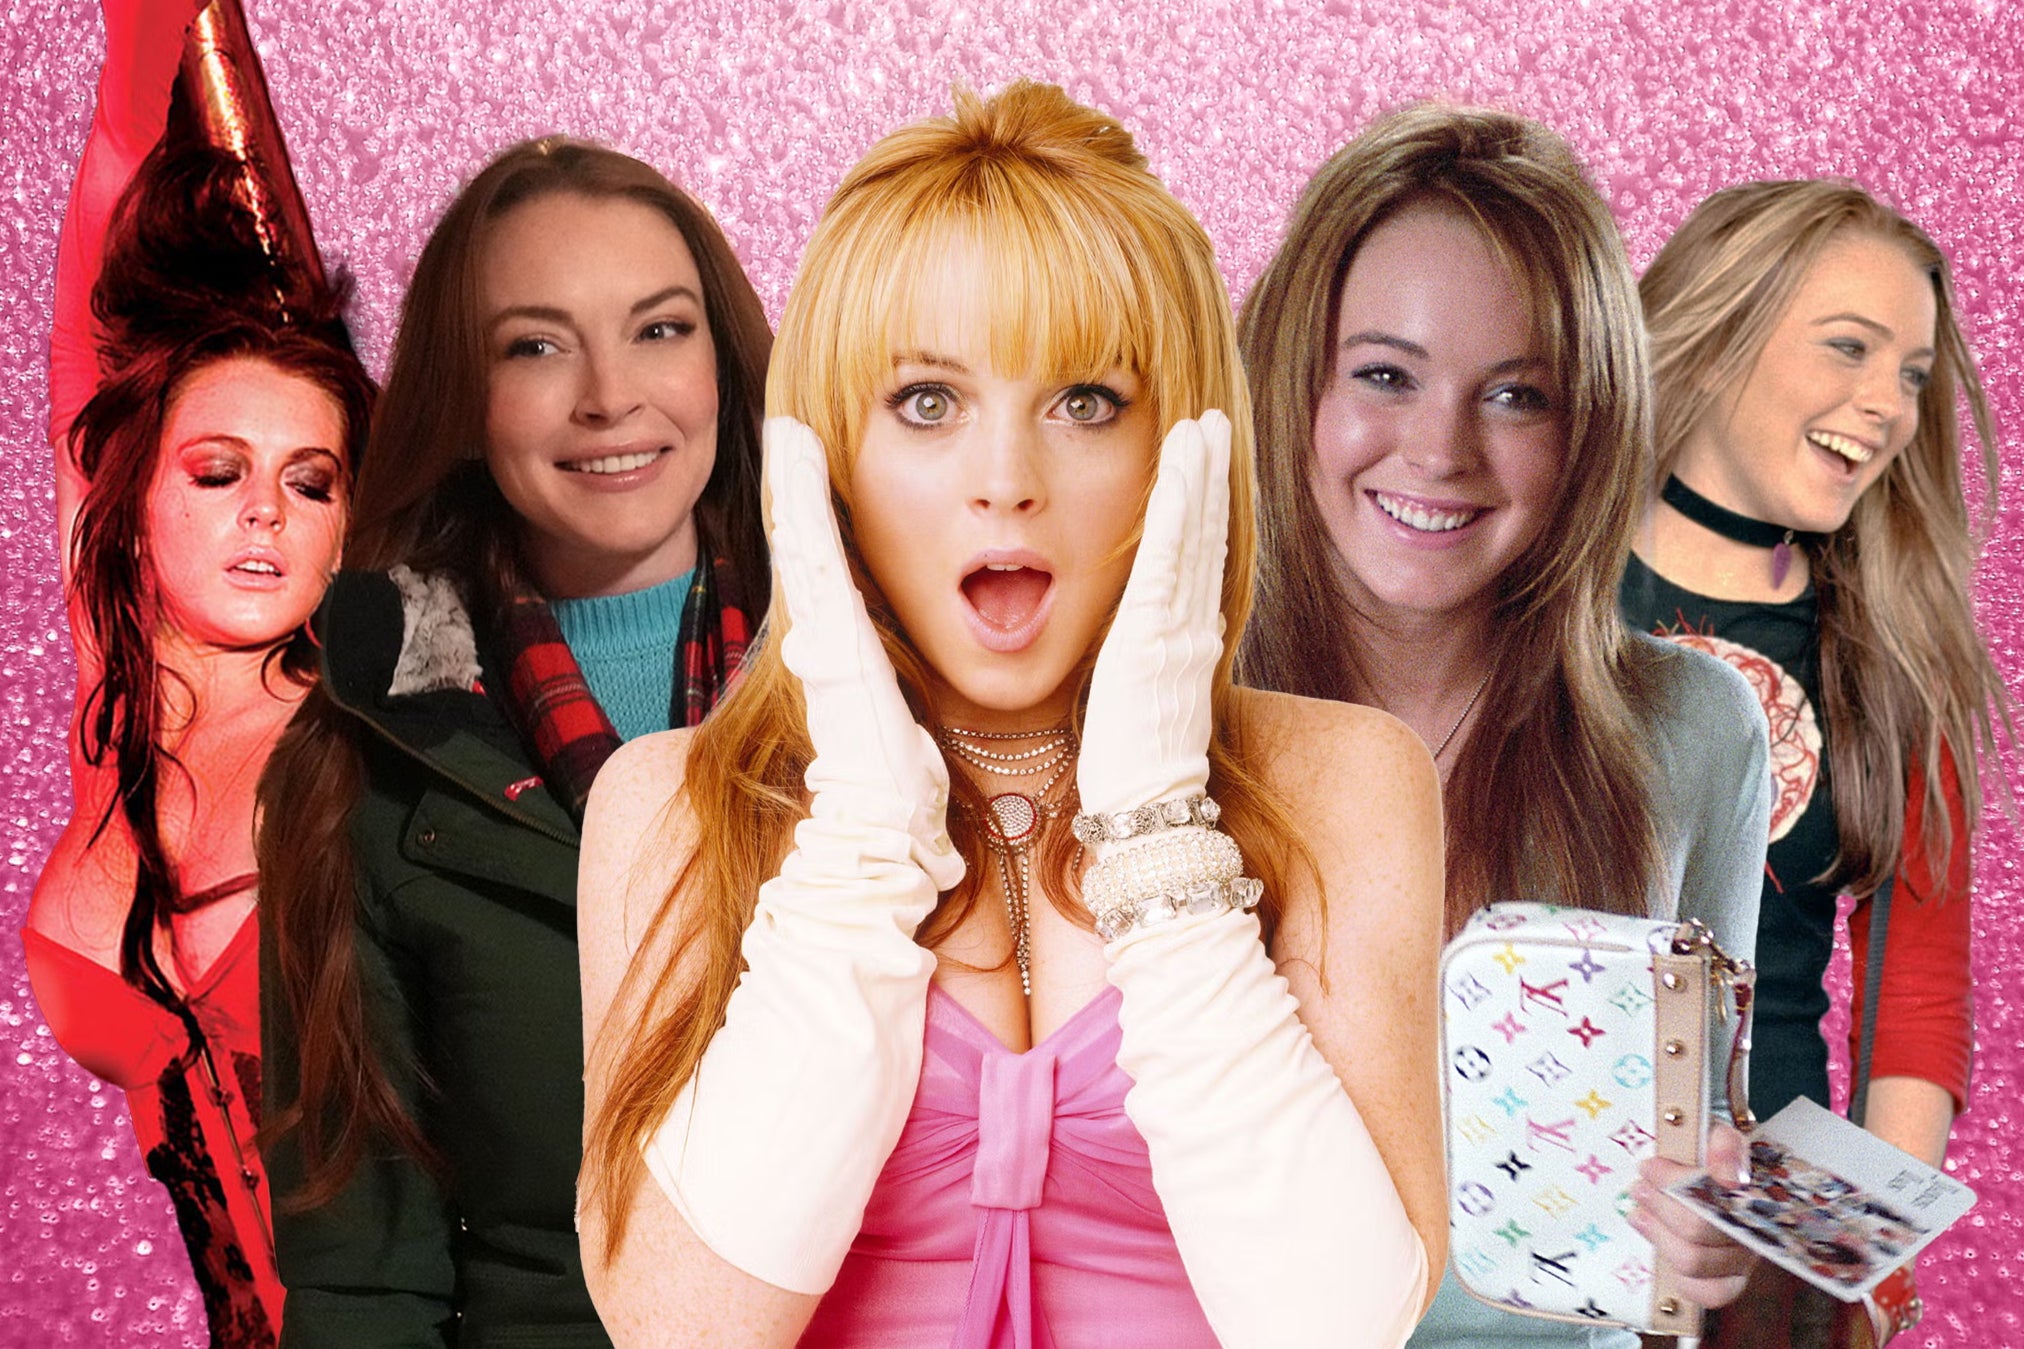 Role call: Lindsay Lohan in ‘I Know Who Killed Me’, ‘Falling for Christmas’, ‘Confessions of a Teenage Drama Queen’, ‘Mean Girls’ and ‘Freaky Friday’